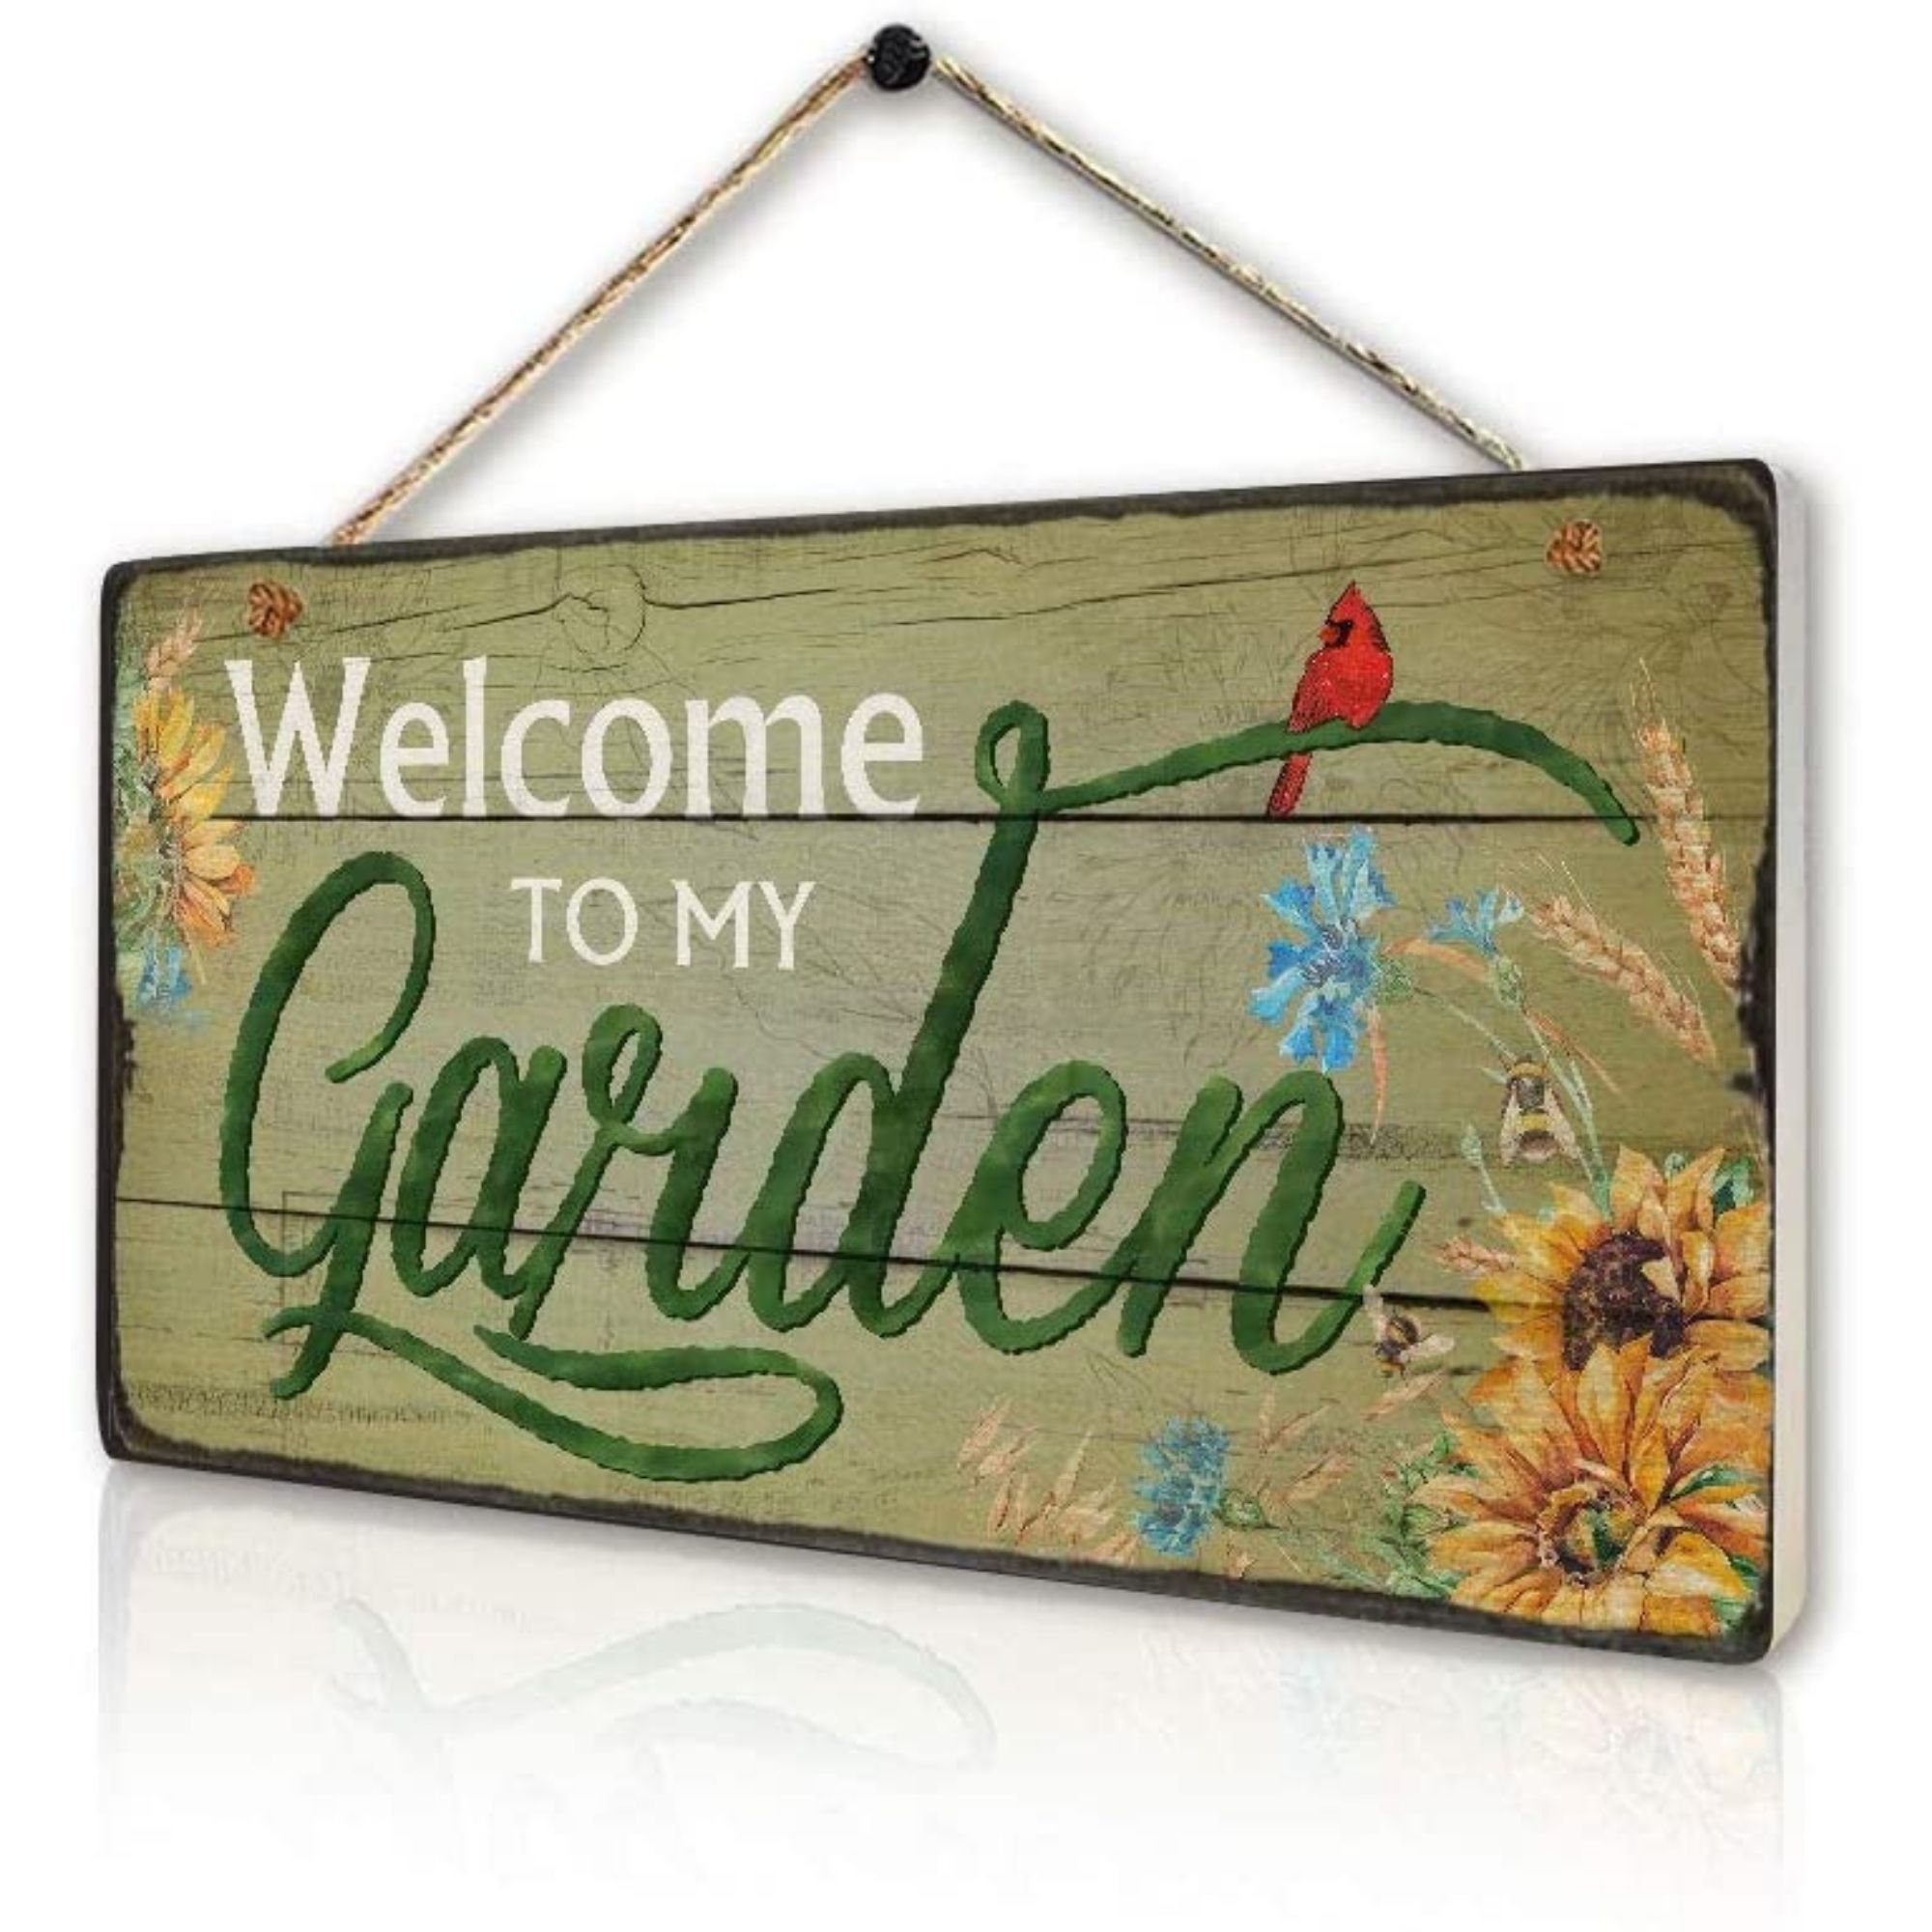 Rustic Garden Sign Vintage Welcome sign to My Garden Hanging | Etsy